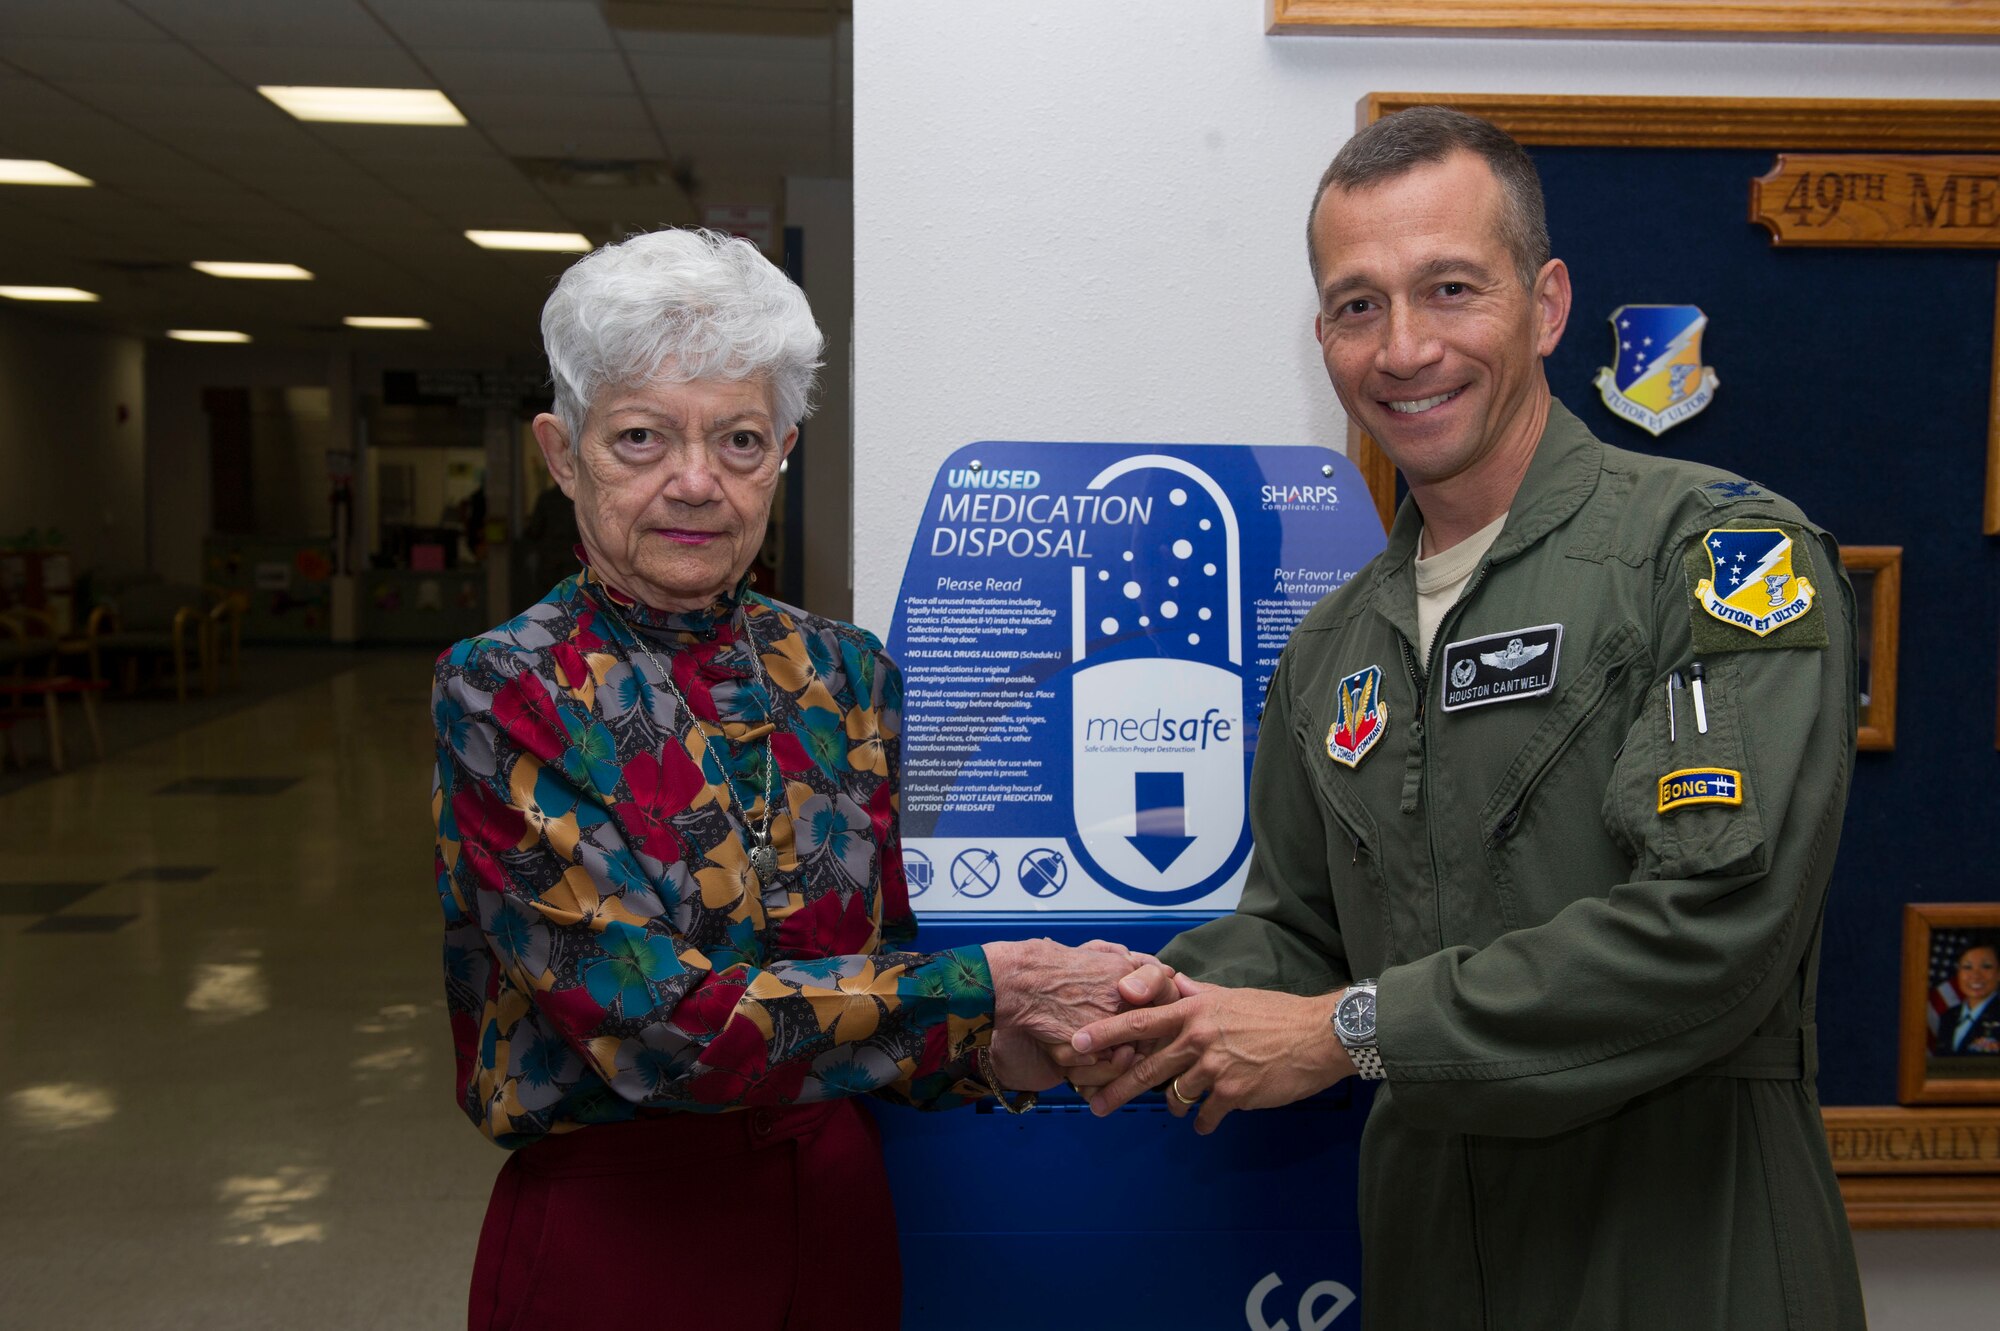 Col. Houston Cantwell, the 49th Wing commander, shakes hands with Matilda Smith, the first person to donate medications as part of the medical group’s ceremony, Oct. 14, 2016. (U.S. Air Force photo by Tech. Sgt. Matthew Rosine.) 